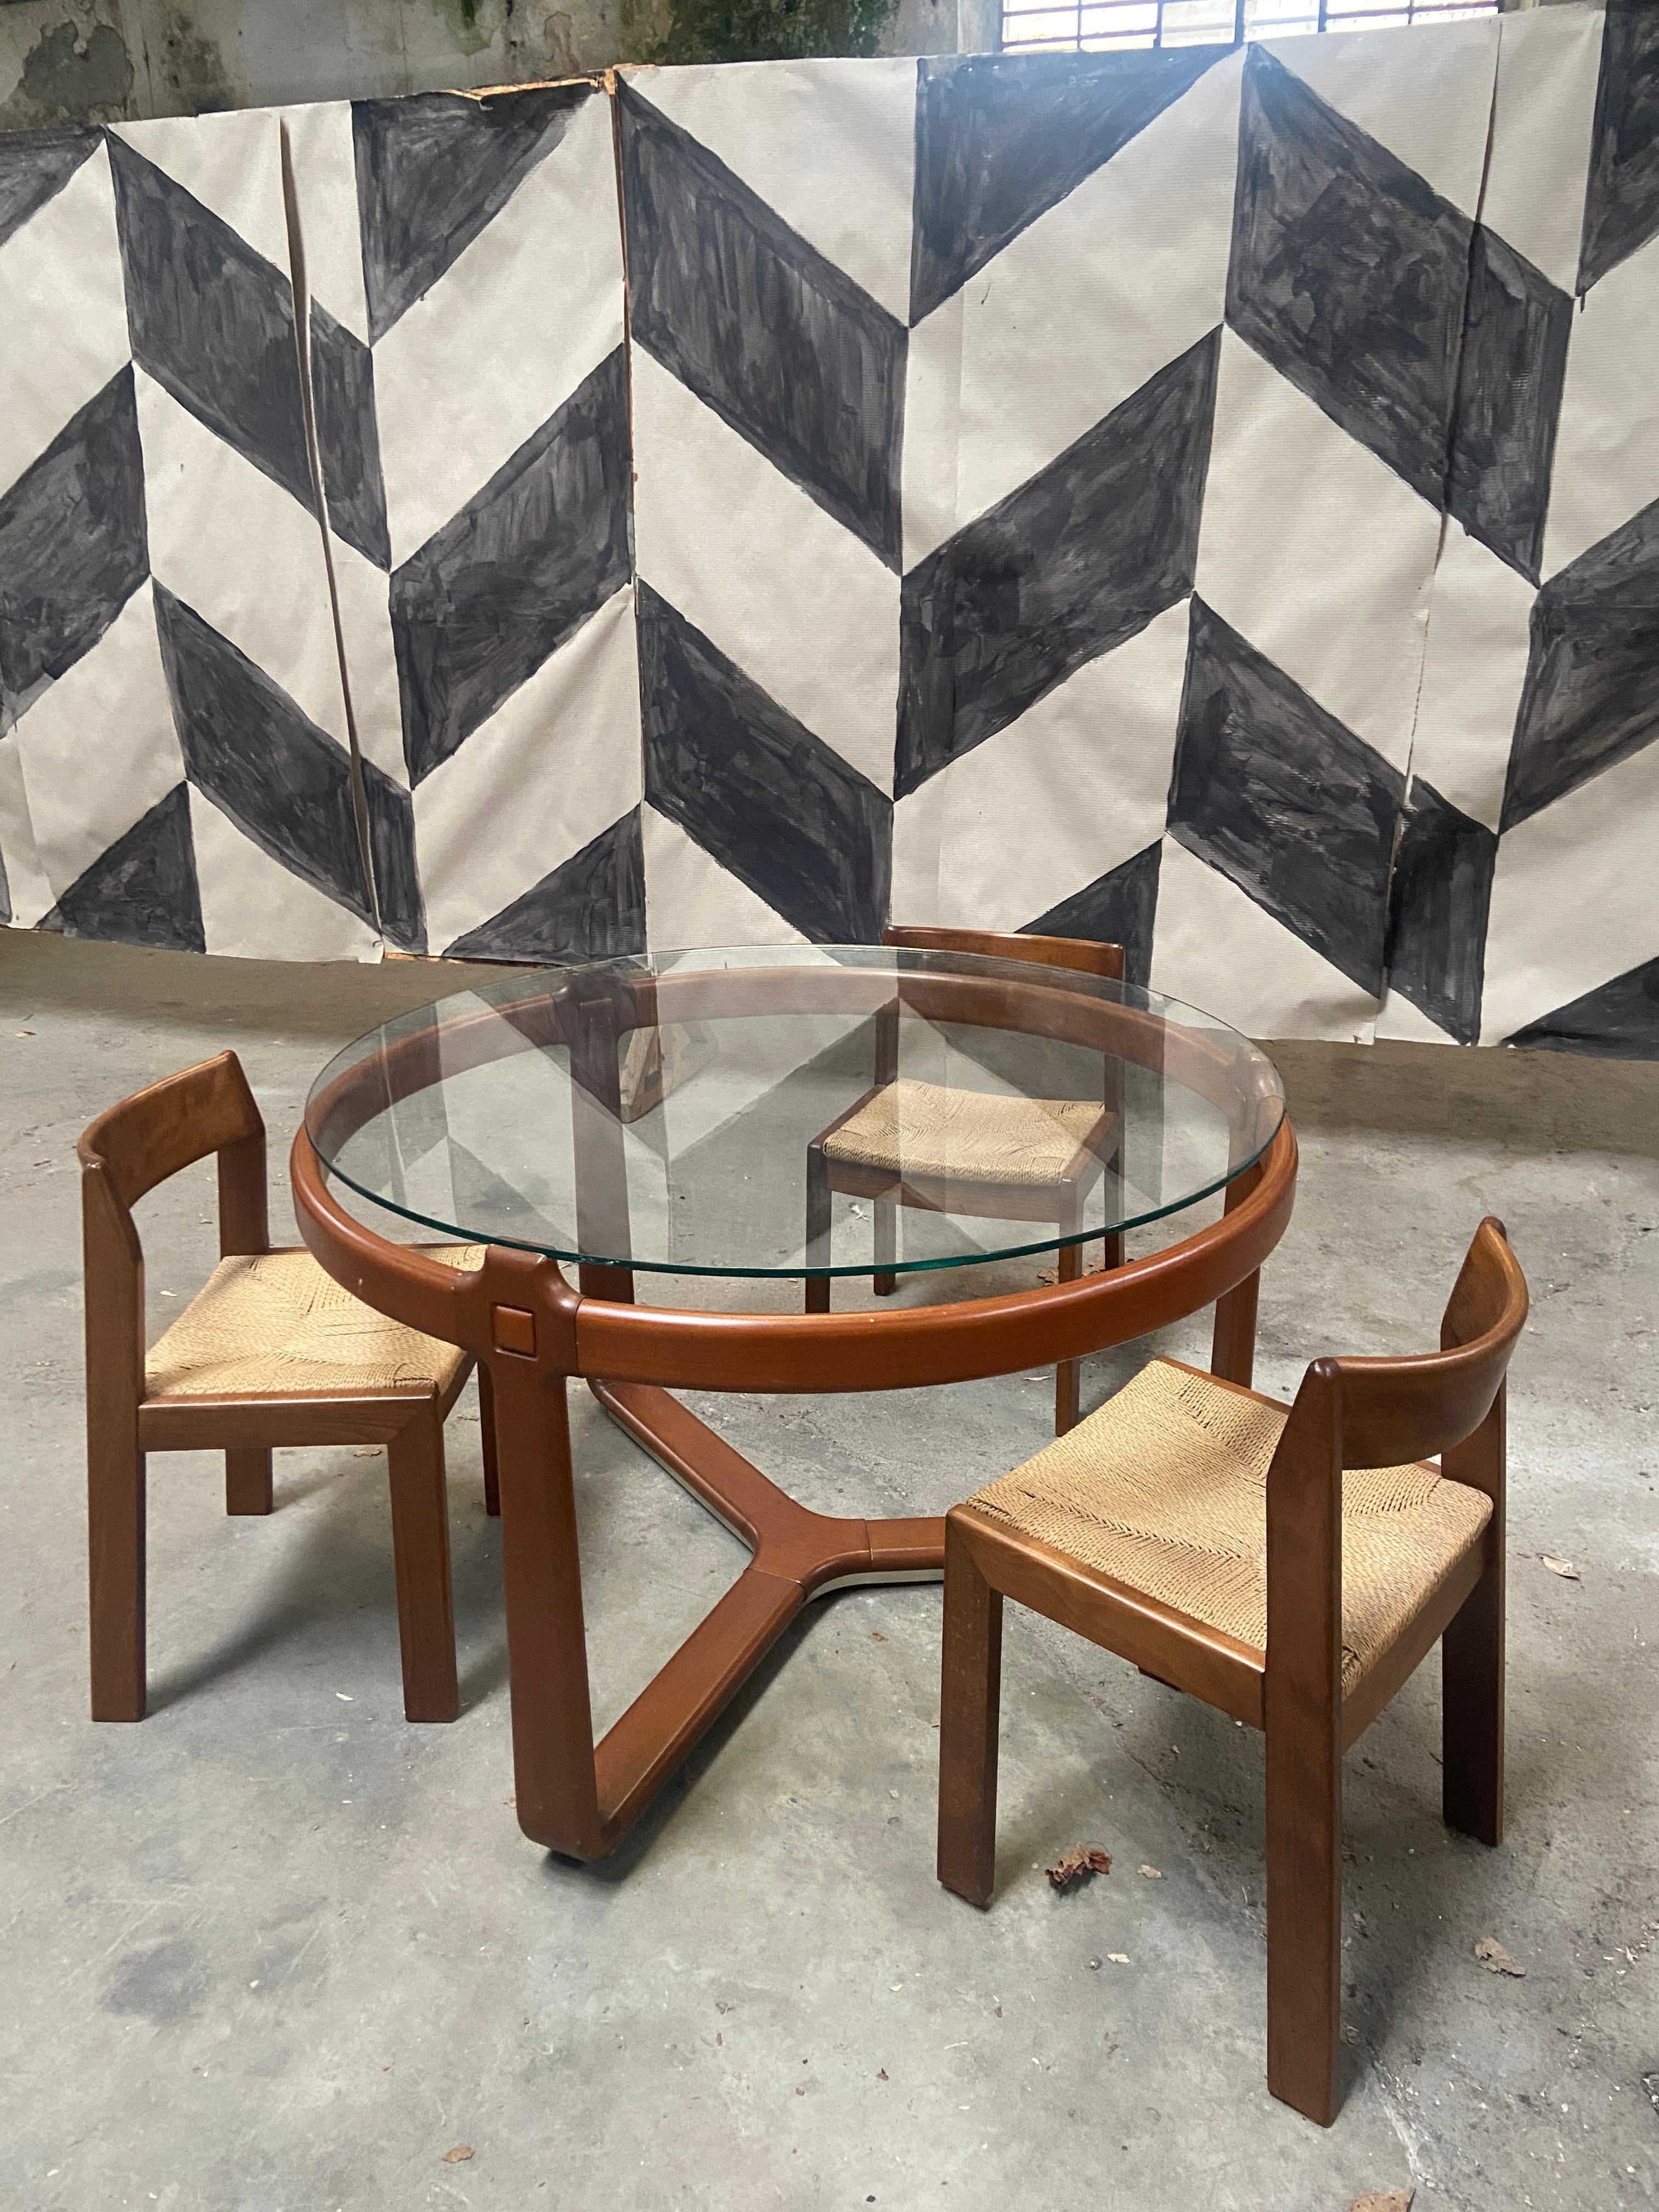 Mid-Century Modern Italian round cherry wood table with smoked glass top and 3 wooden chairs in the style of Ceccotti. 1970s
The table has an amazing tripod basement and the table top rests on the extension of the legs so that it appears to be